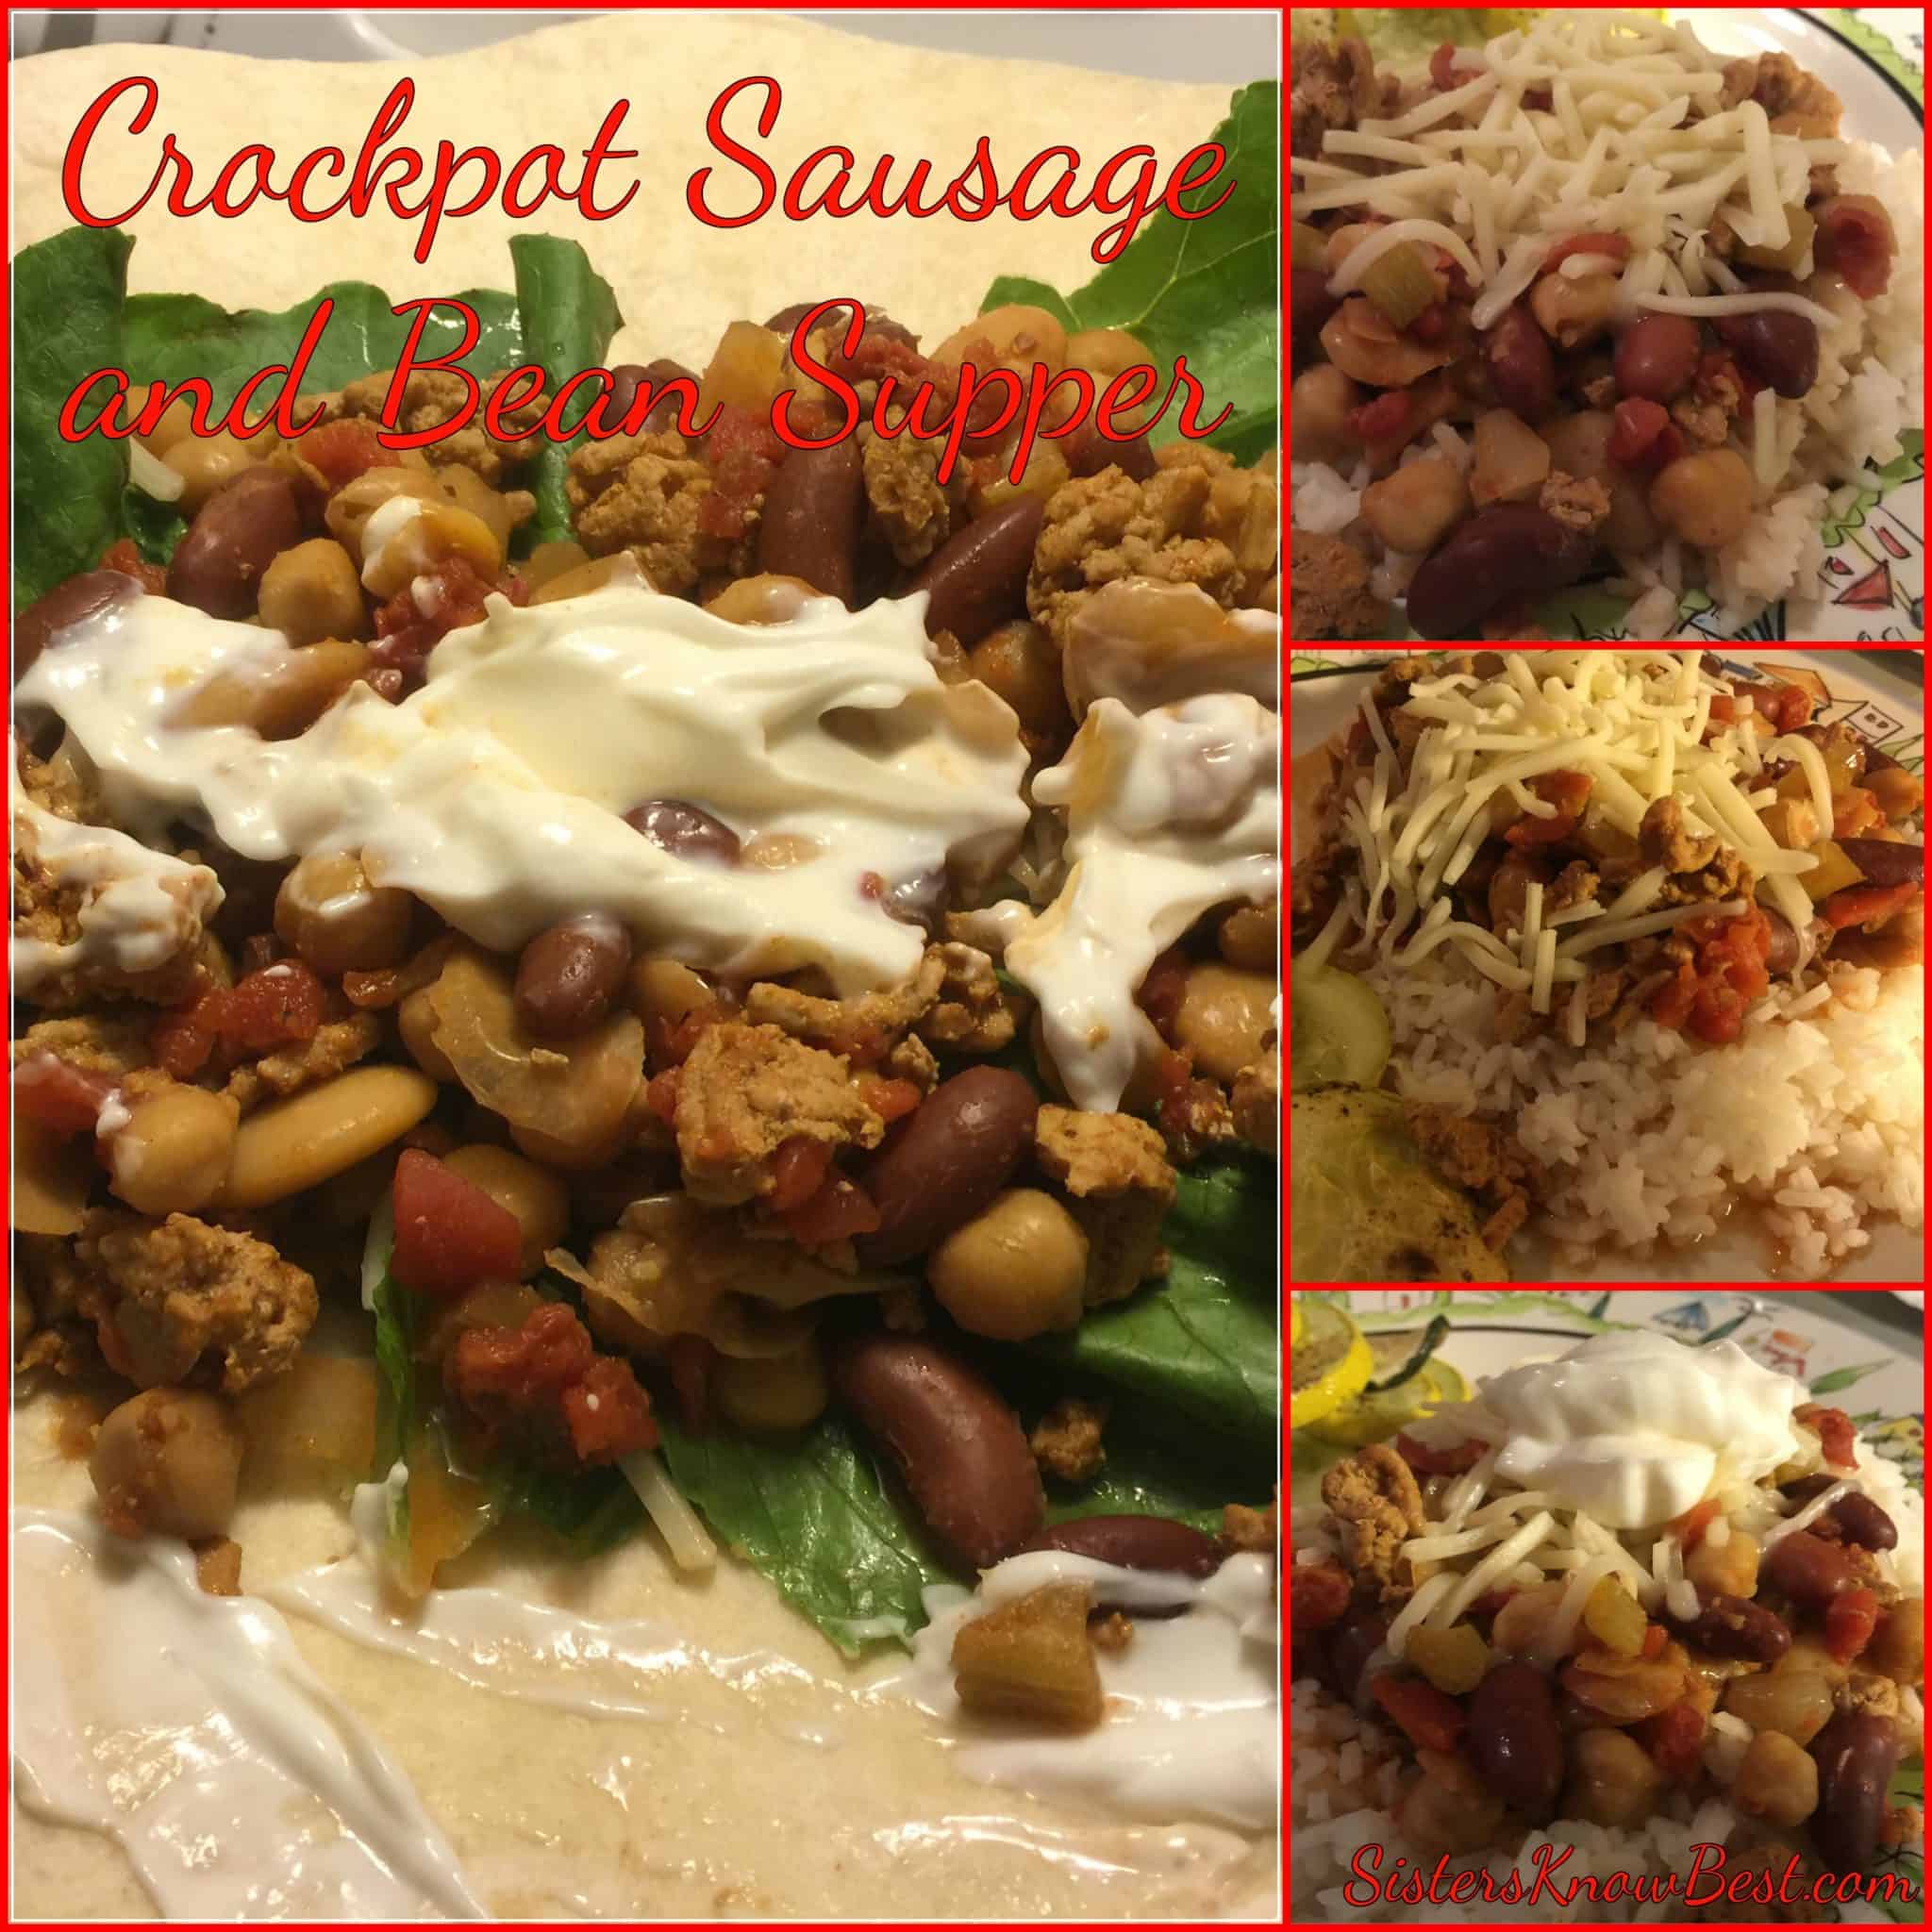 Crockpot Sausage and Bean Supper - Sisters Know Best